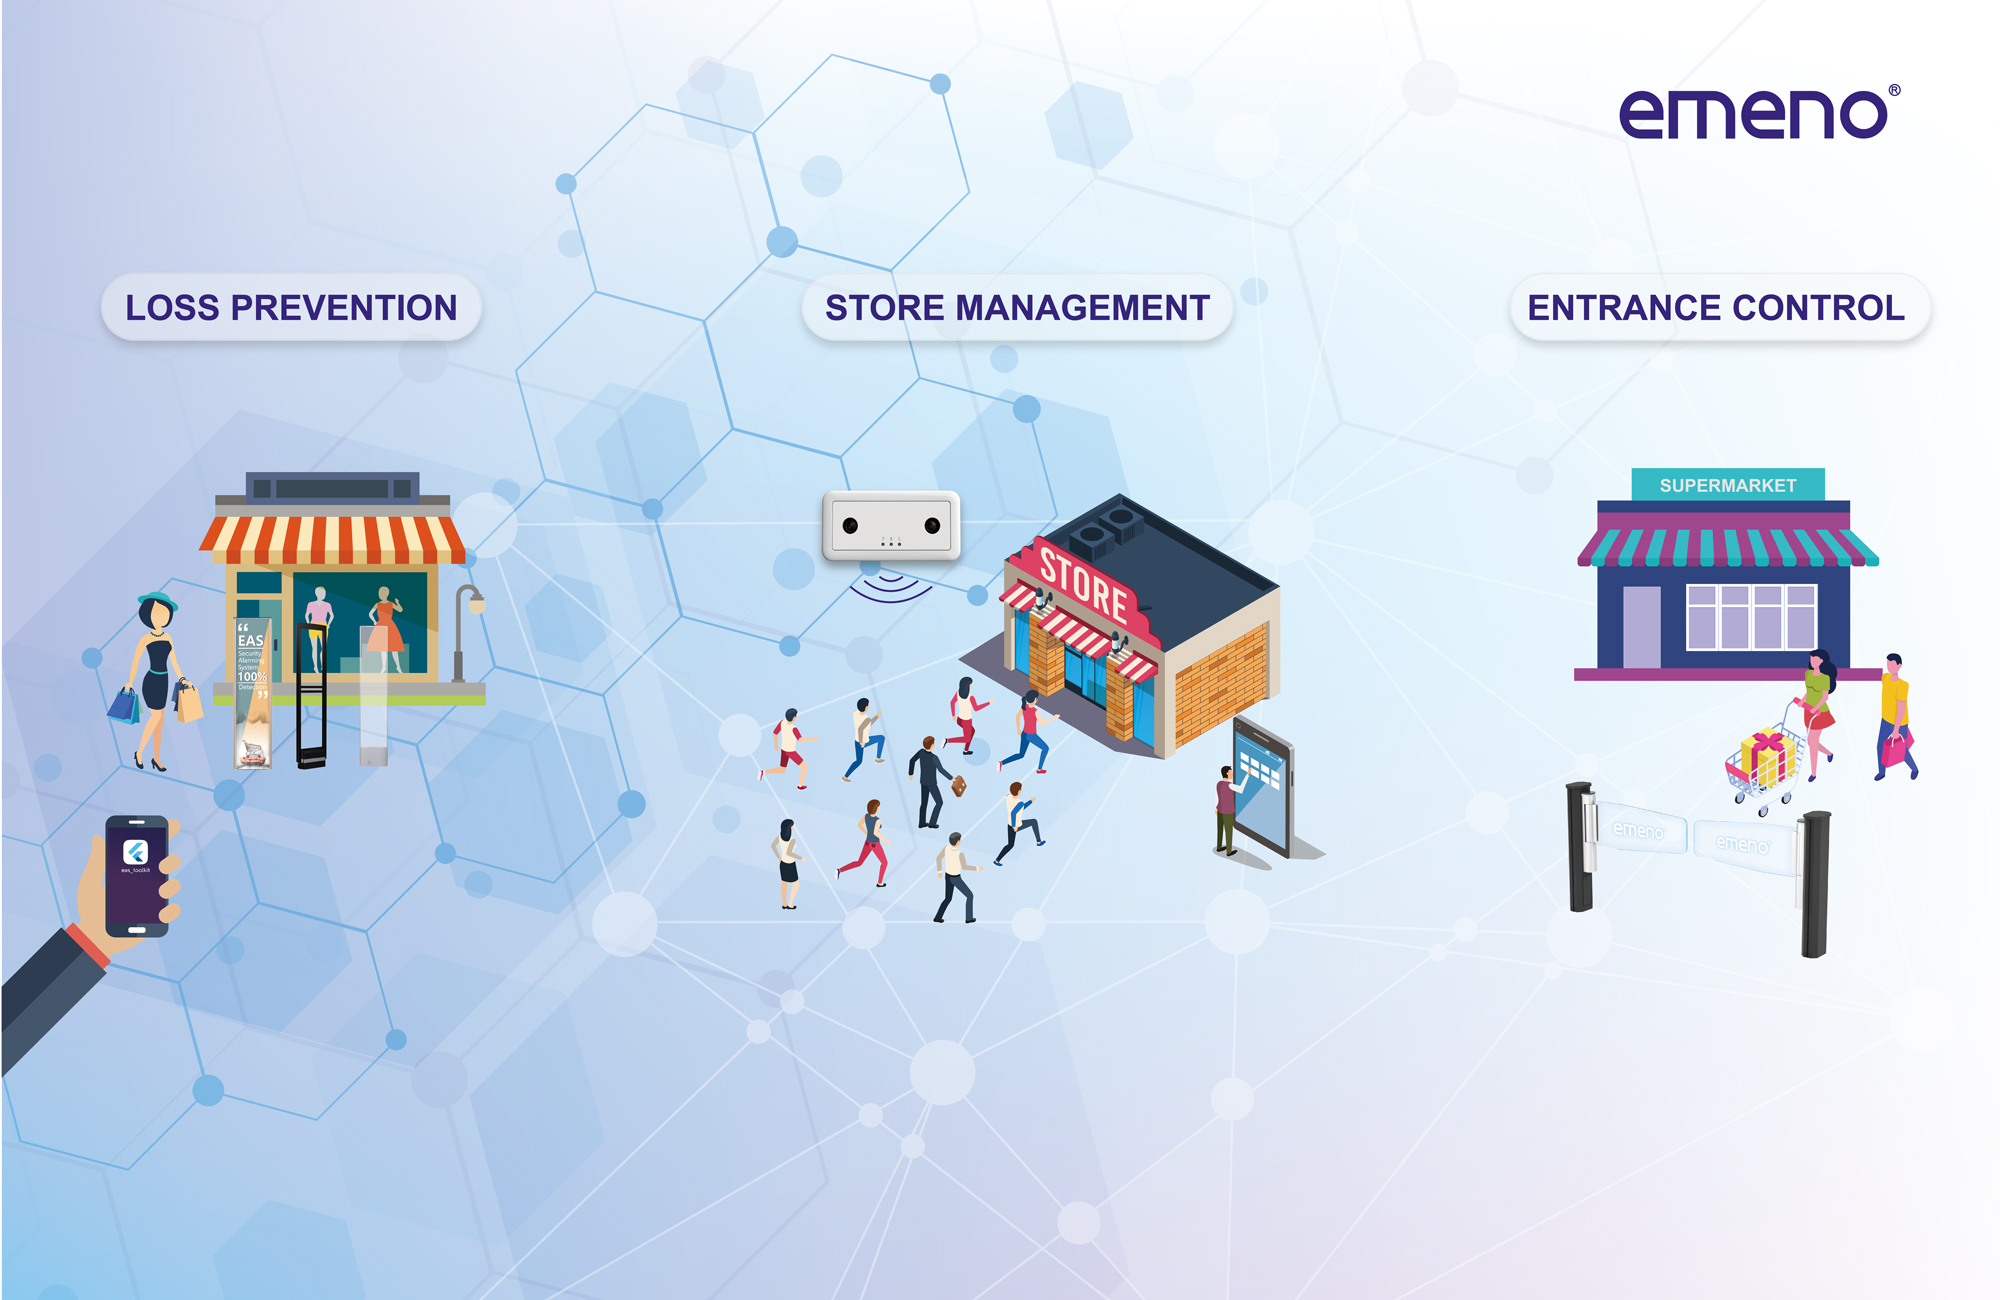 Emeno| A Professional Retail Security Solution Provider